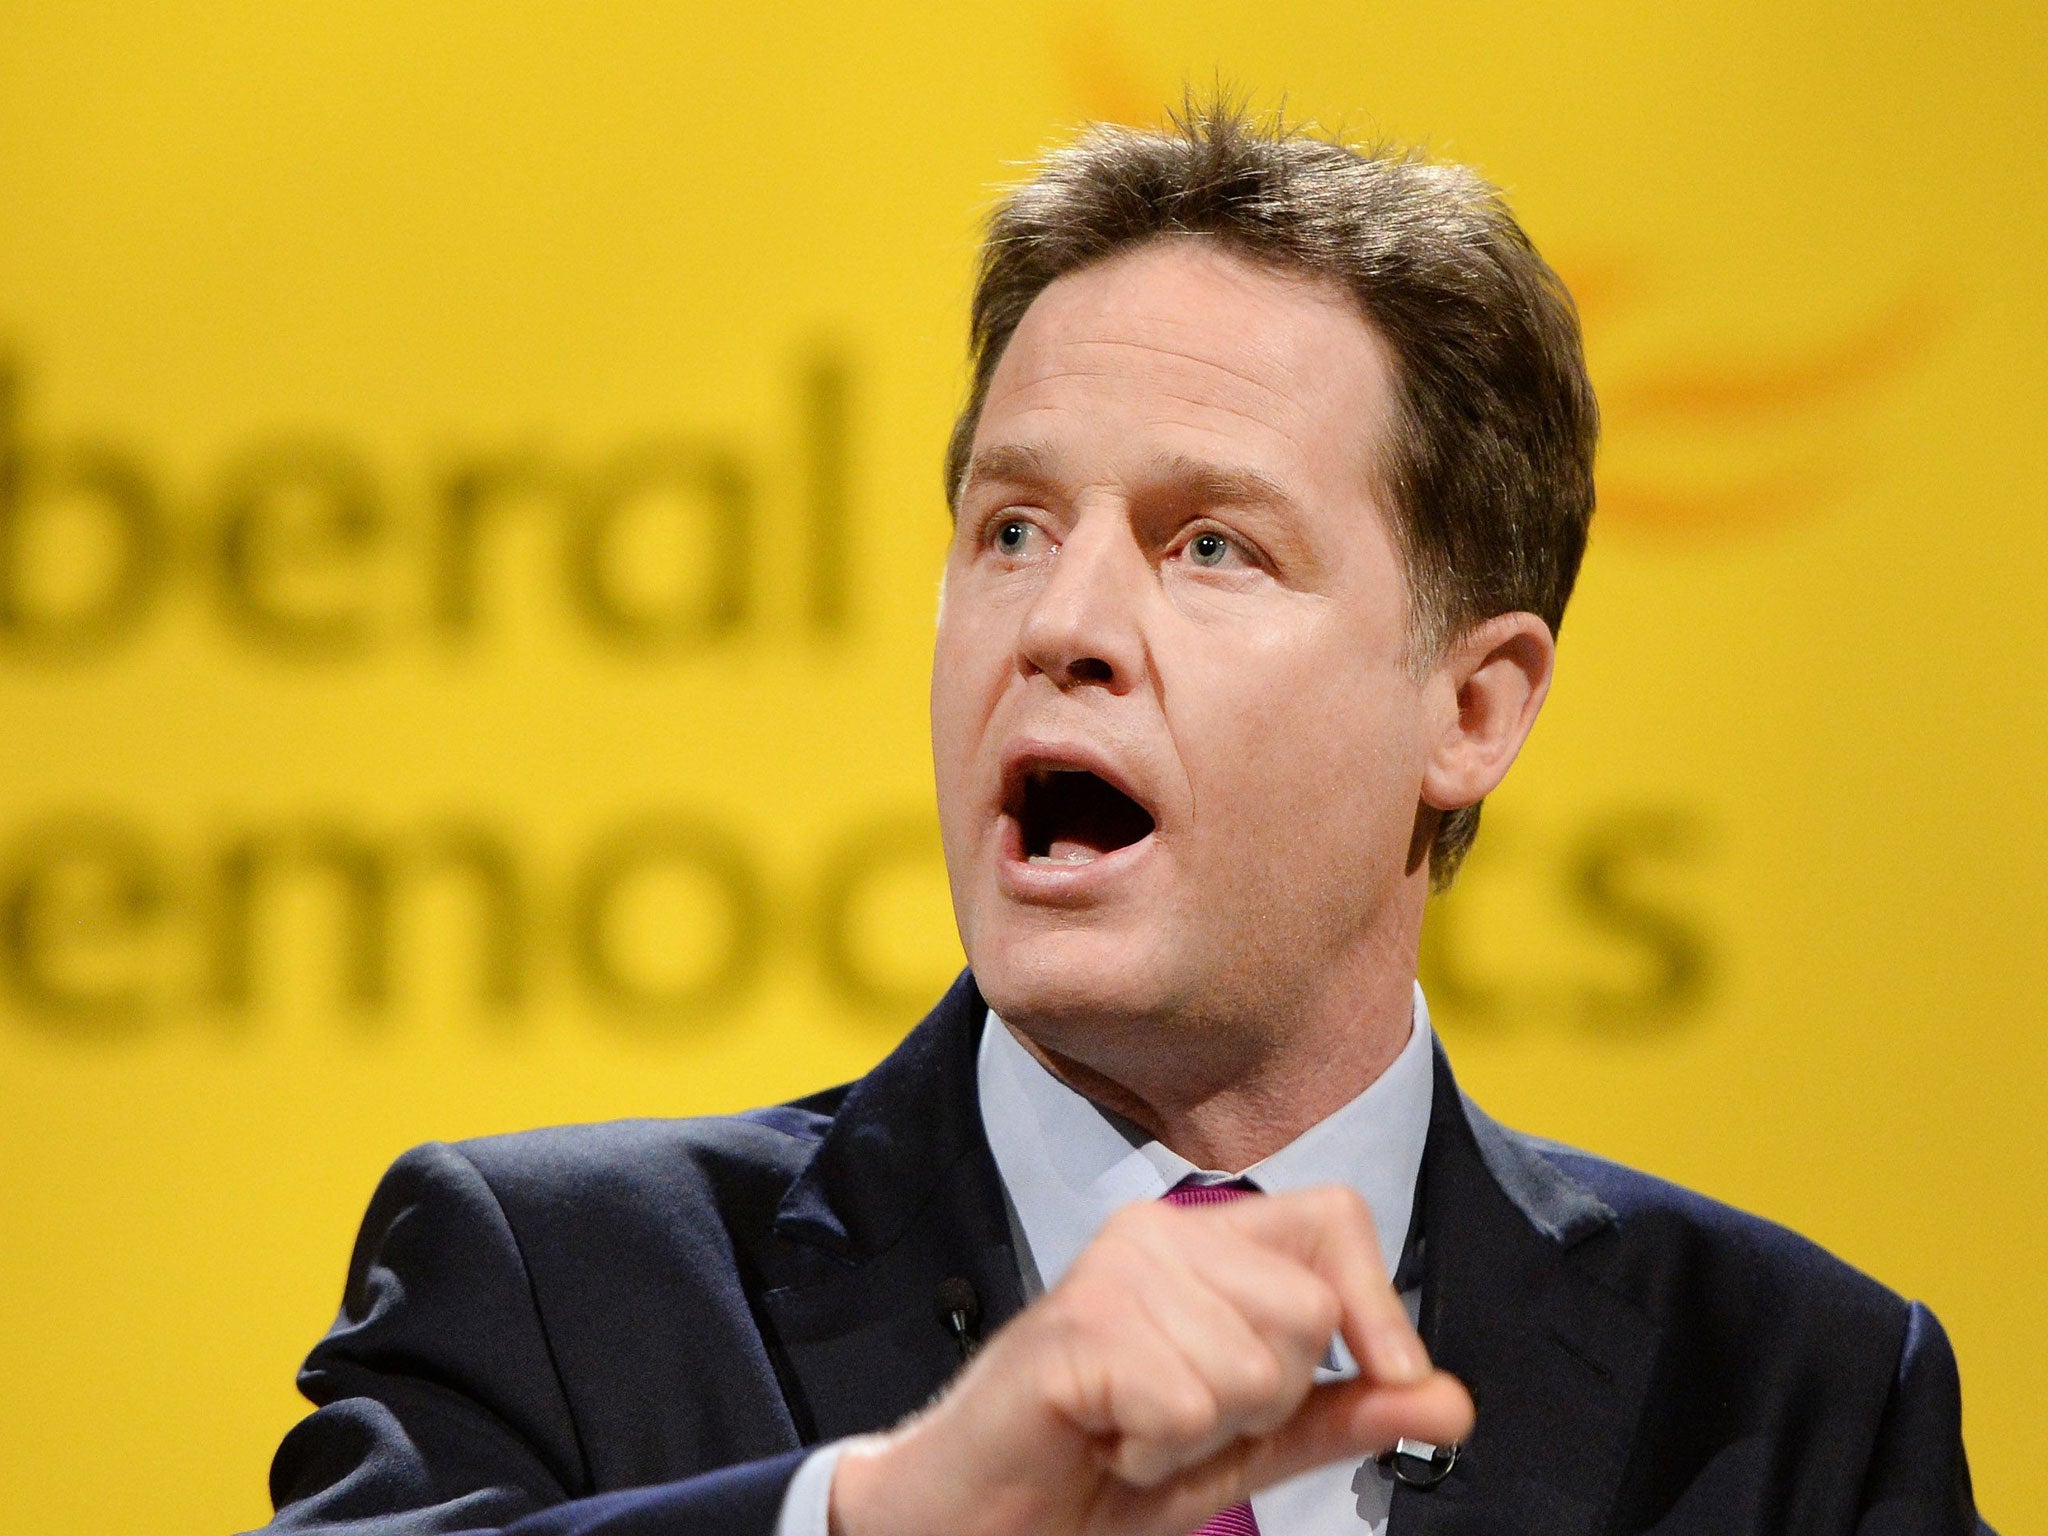 Nick Clegg wants to emphasise the party's role in the economic recovery